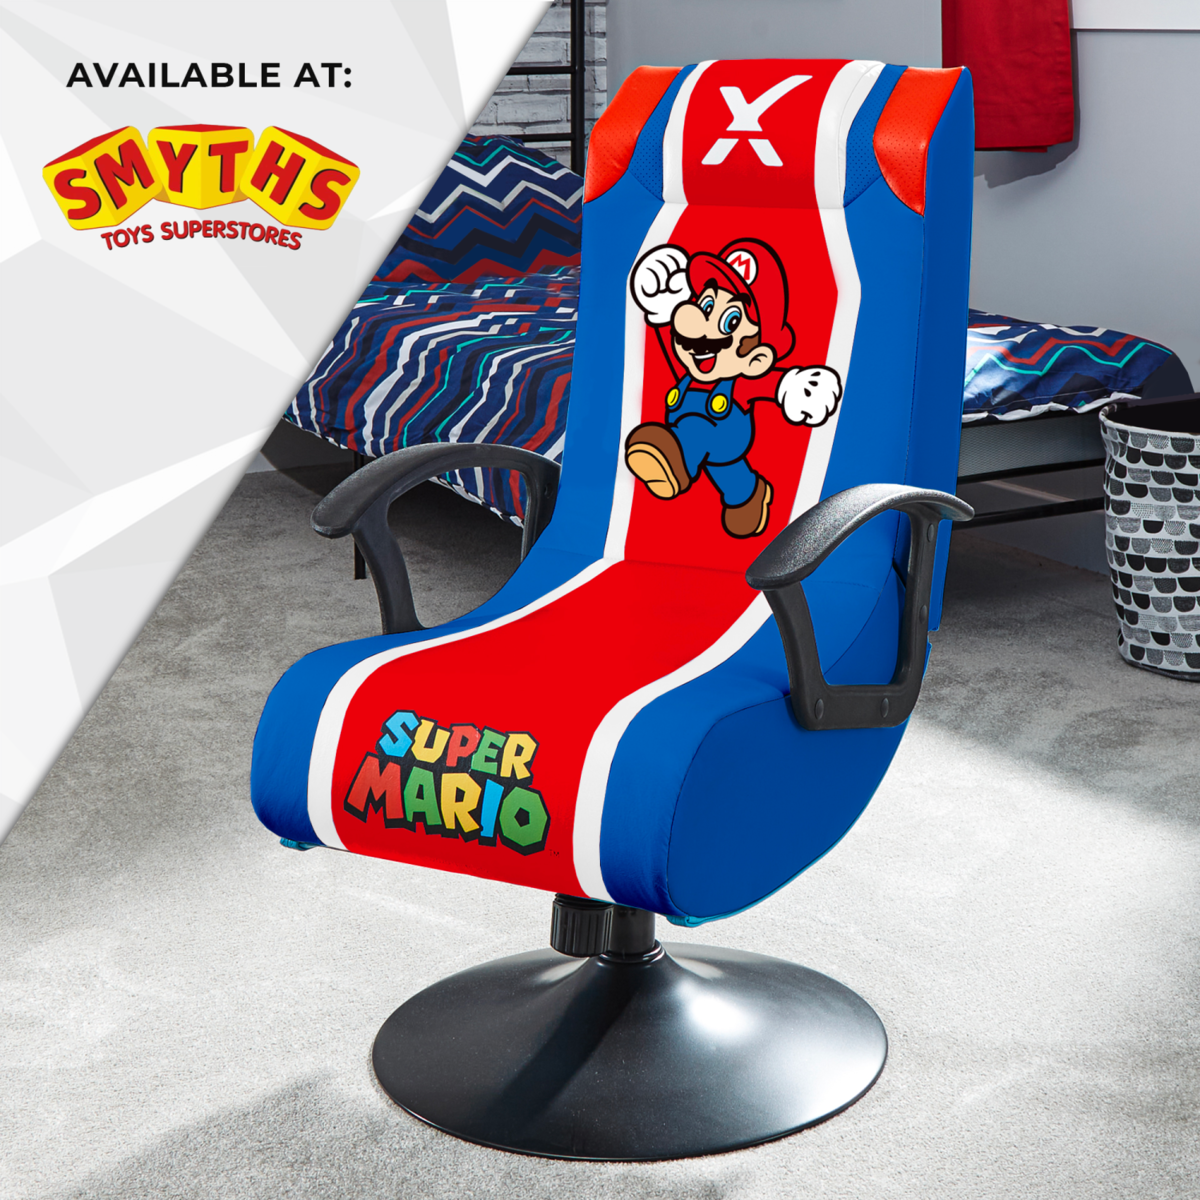 Nintendo Super Mario X Rocker Audio Pedestal Gaming Chair - Mario Edition in Royal Blue available at Smyths Toys Superstores